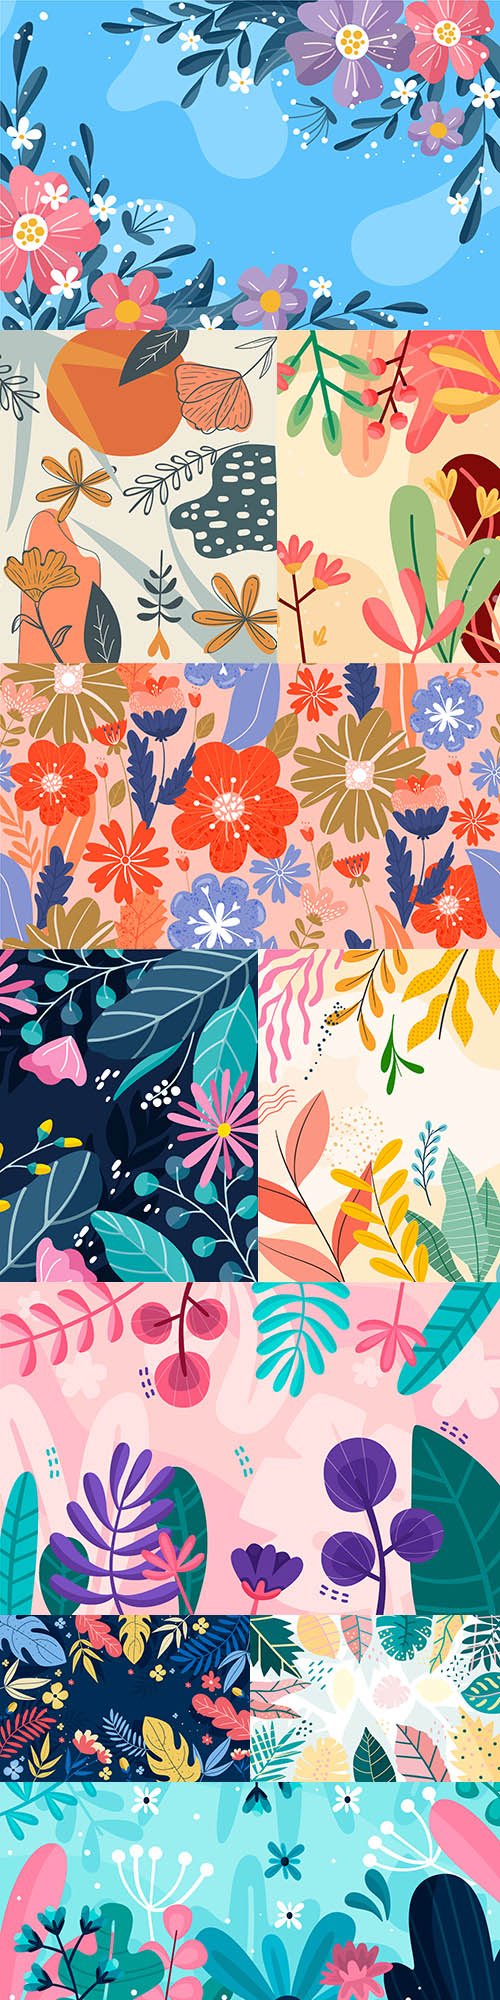 Abstract floral background in flat design